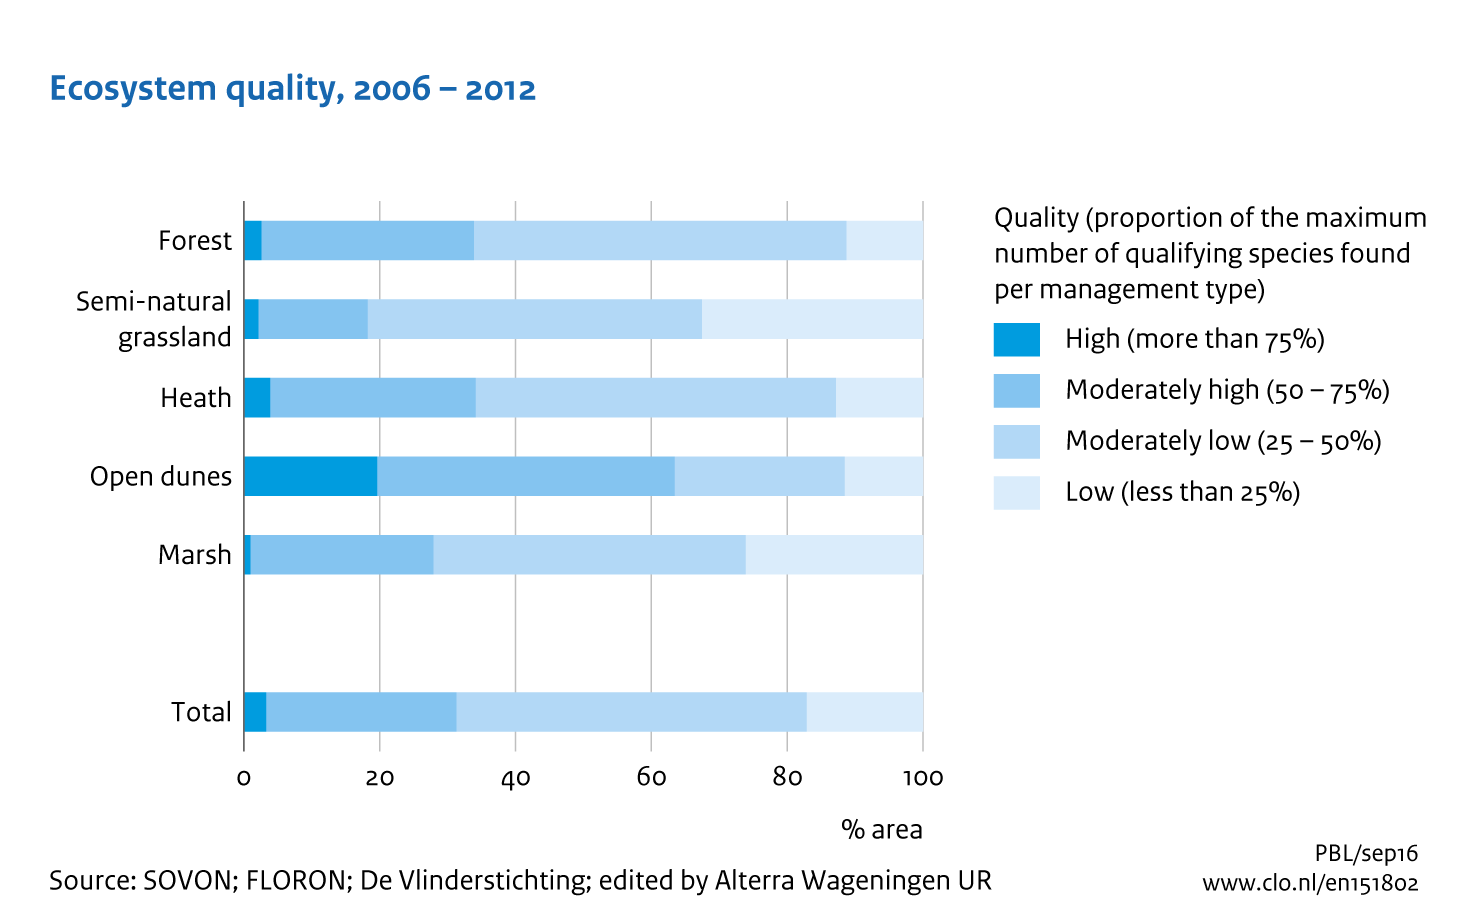 Image  Ecosystem quality 2006-2012. The image is further explained in the text.